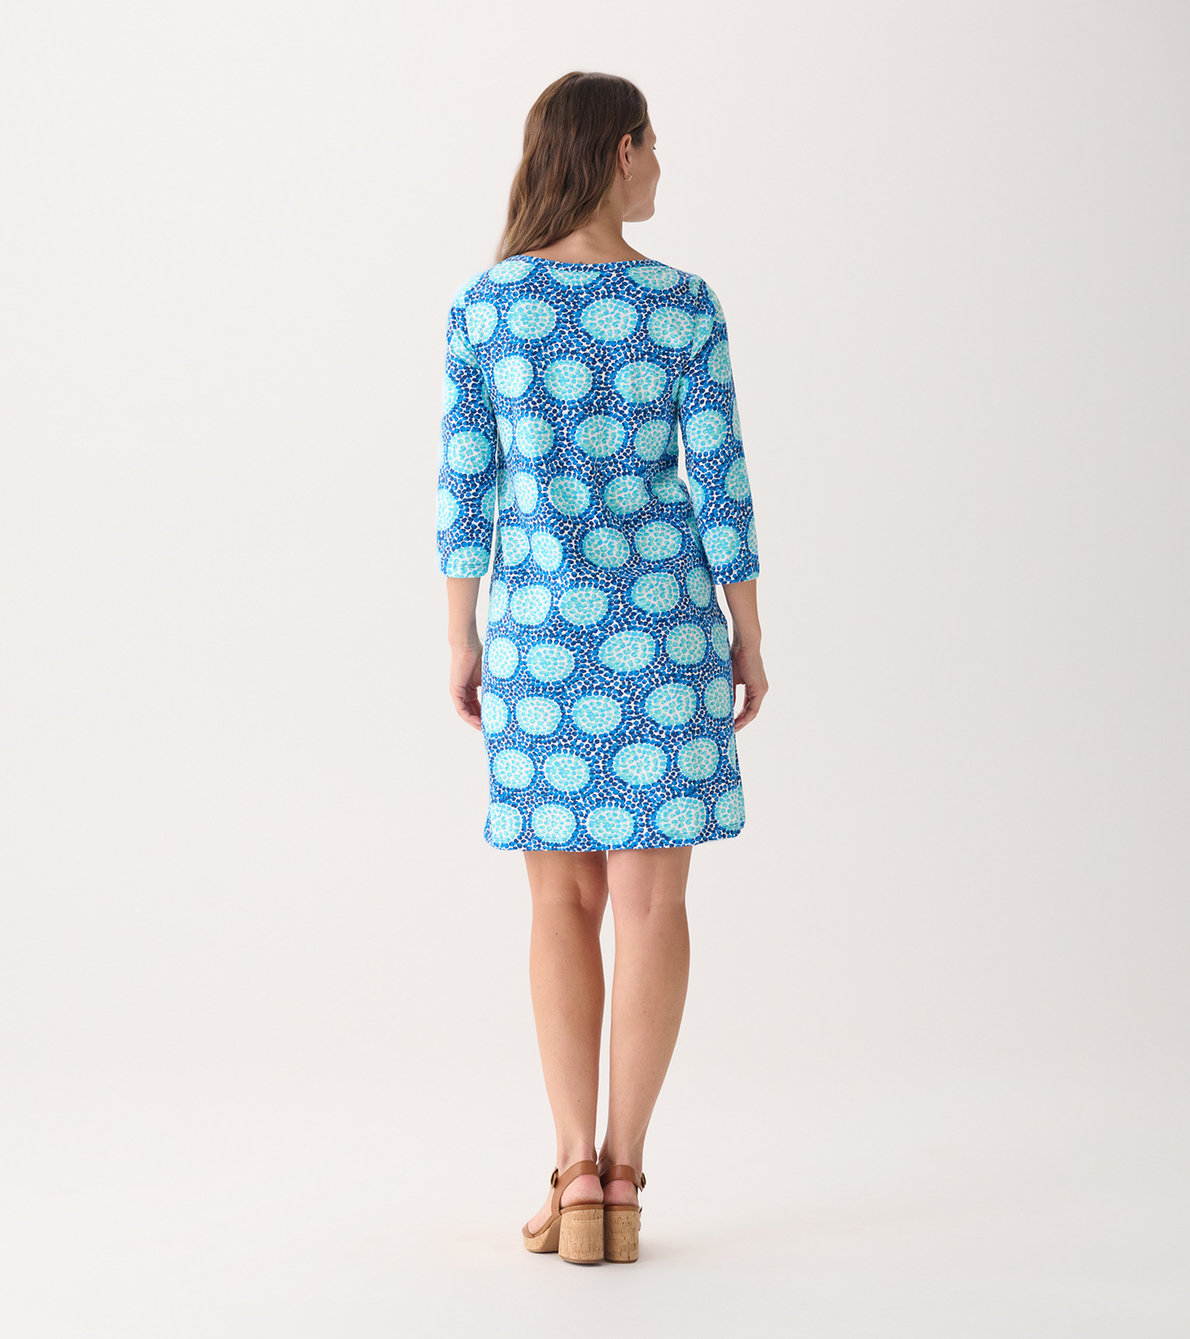 View larger image of Women's Cobblestone Path 3/4 Sleeve Summer Dress